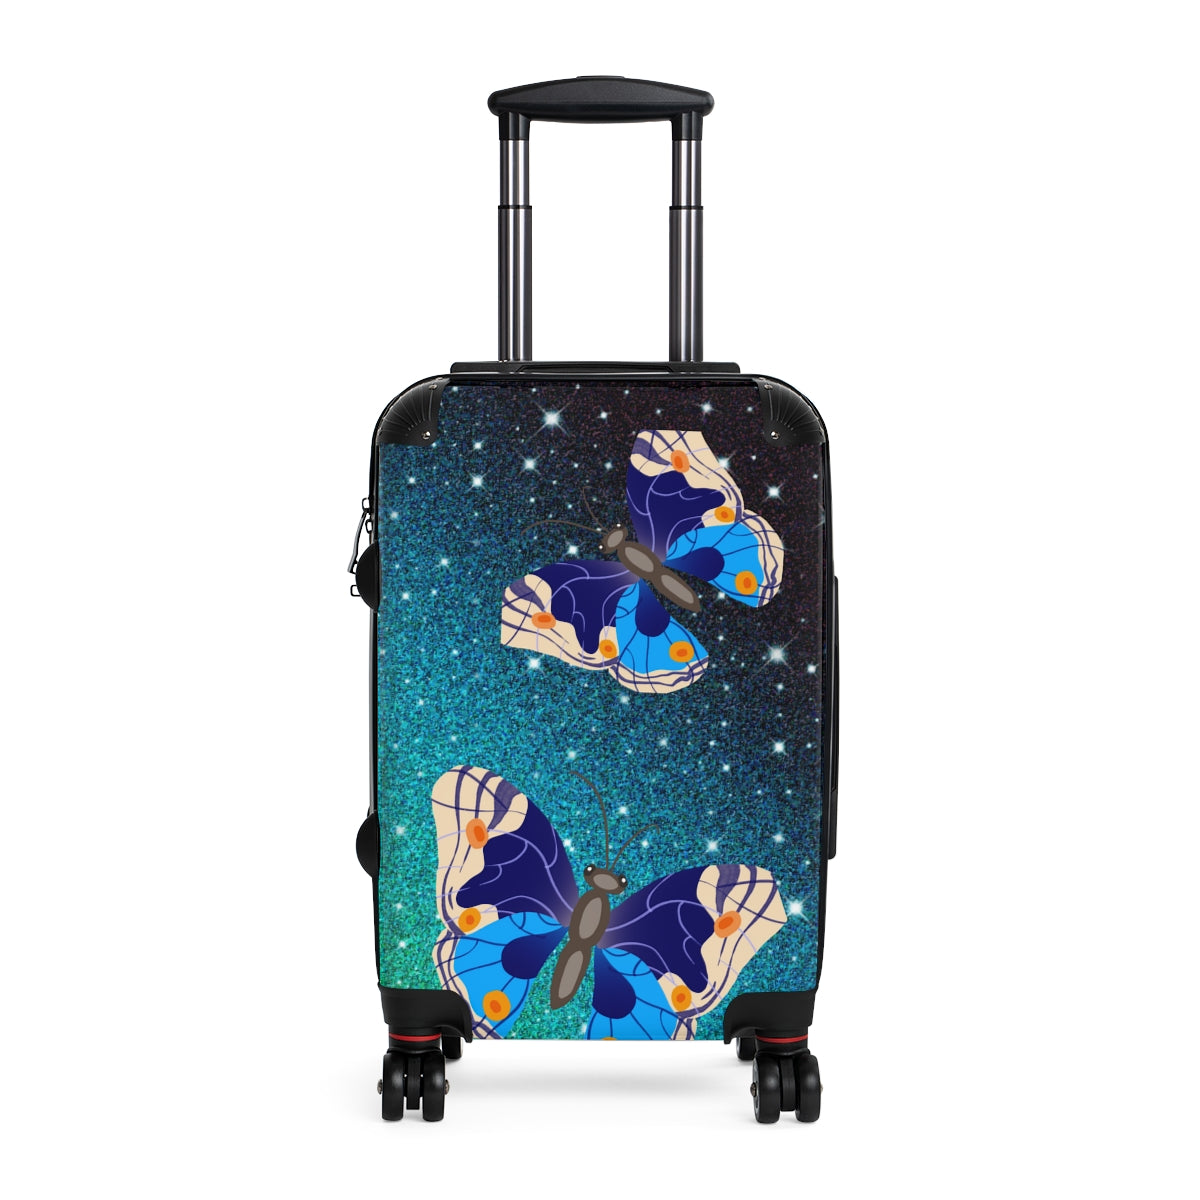 CARRY ON SUITCASES WITH WHEELS BY RTZIRA, CABIN SUITCASE, CARRY ON LUGGAGE, HARD SHELL TSL COMBINATION LOCK, SPINNER